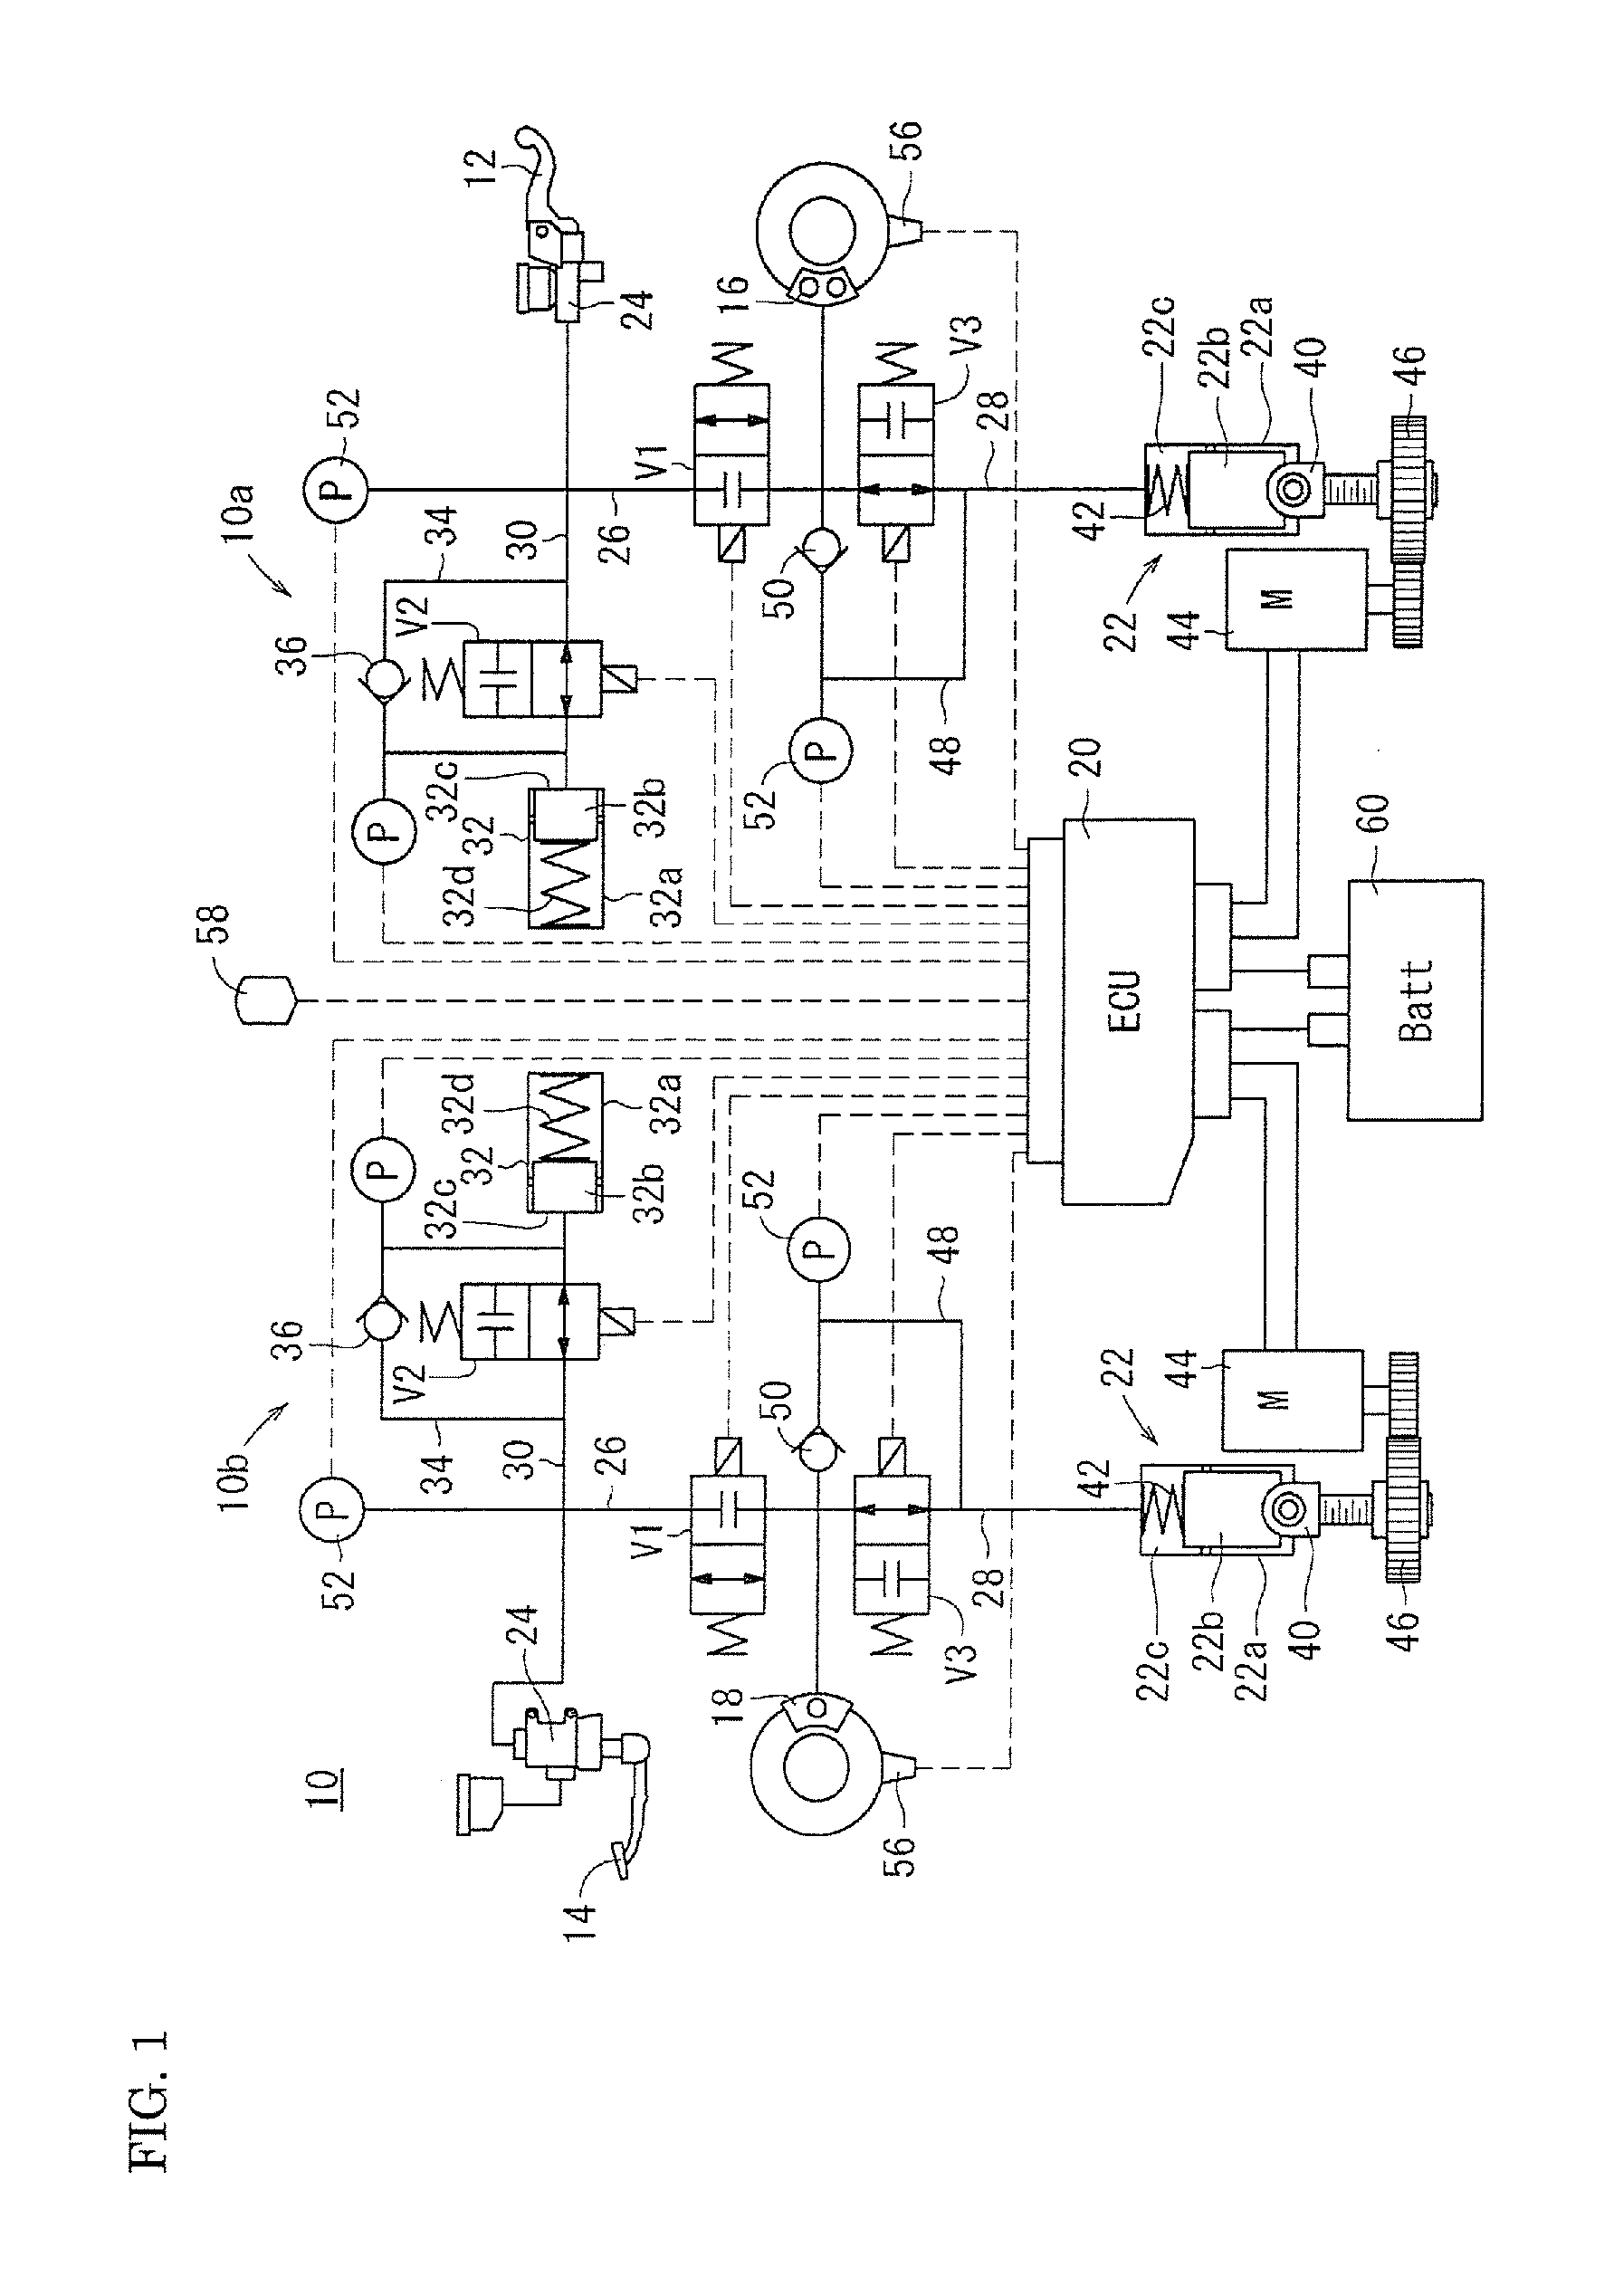 Brake device for a motorcycle